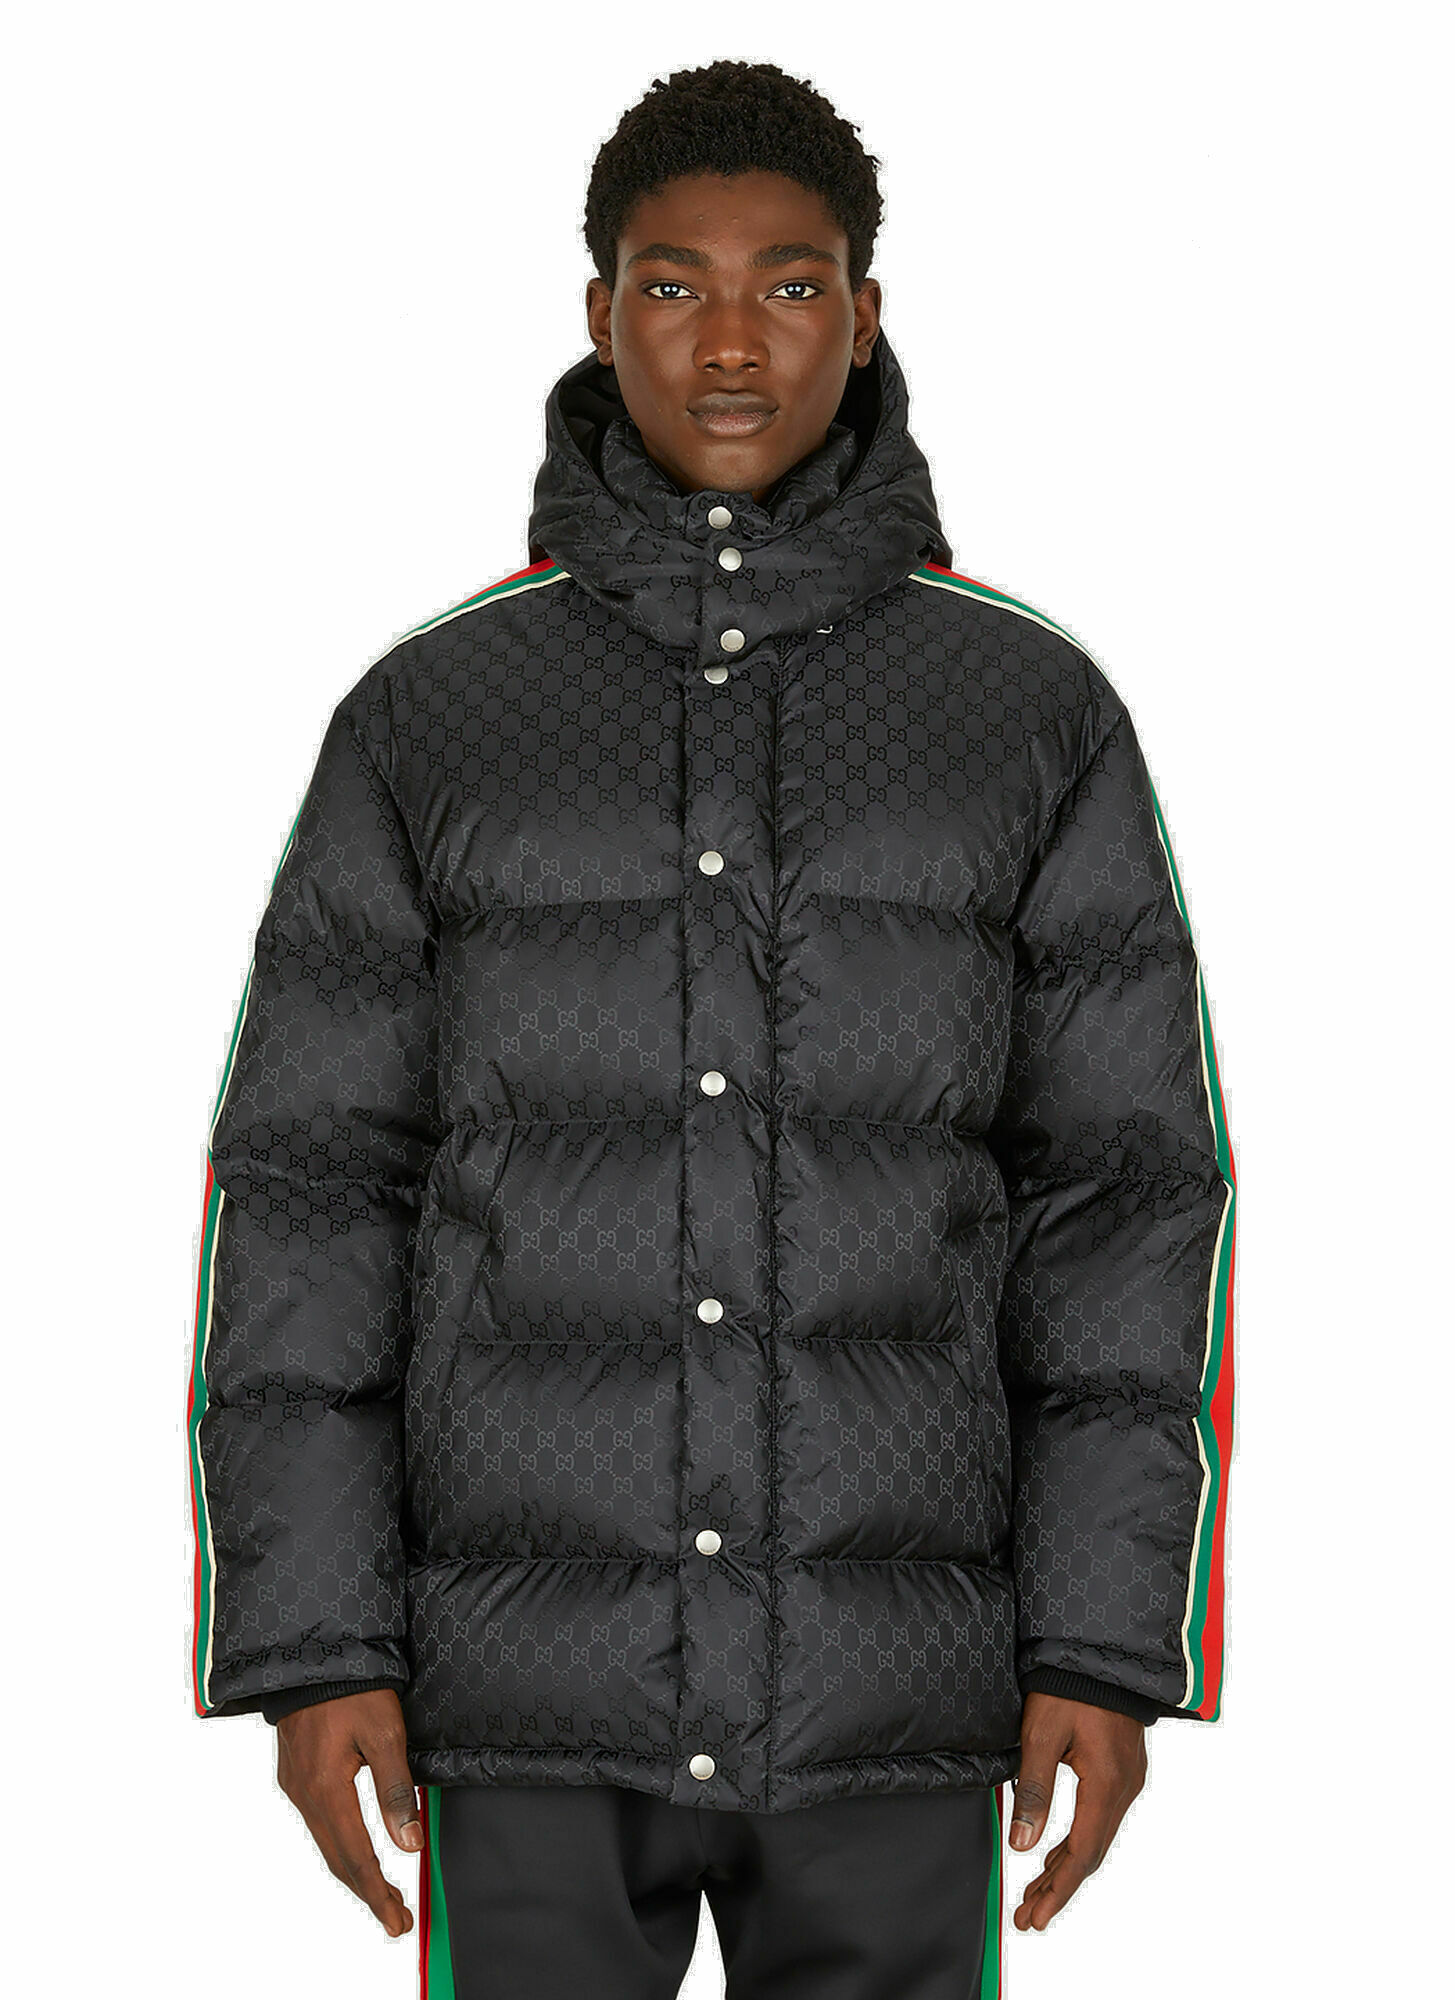 GG Hooded Puffer Jacket in Black Gucci